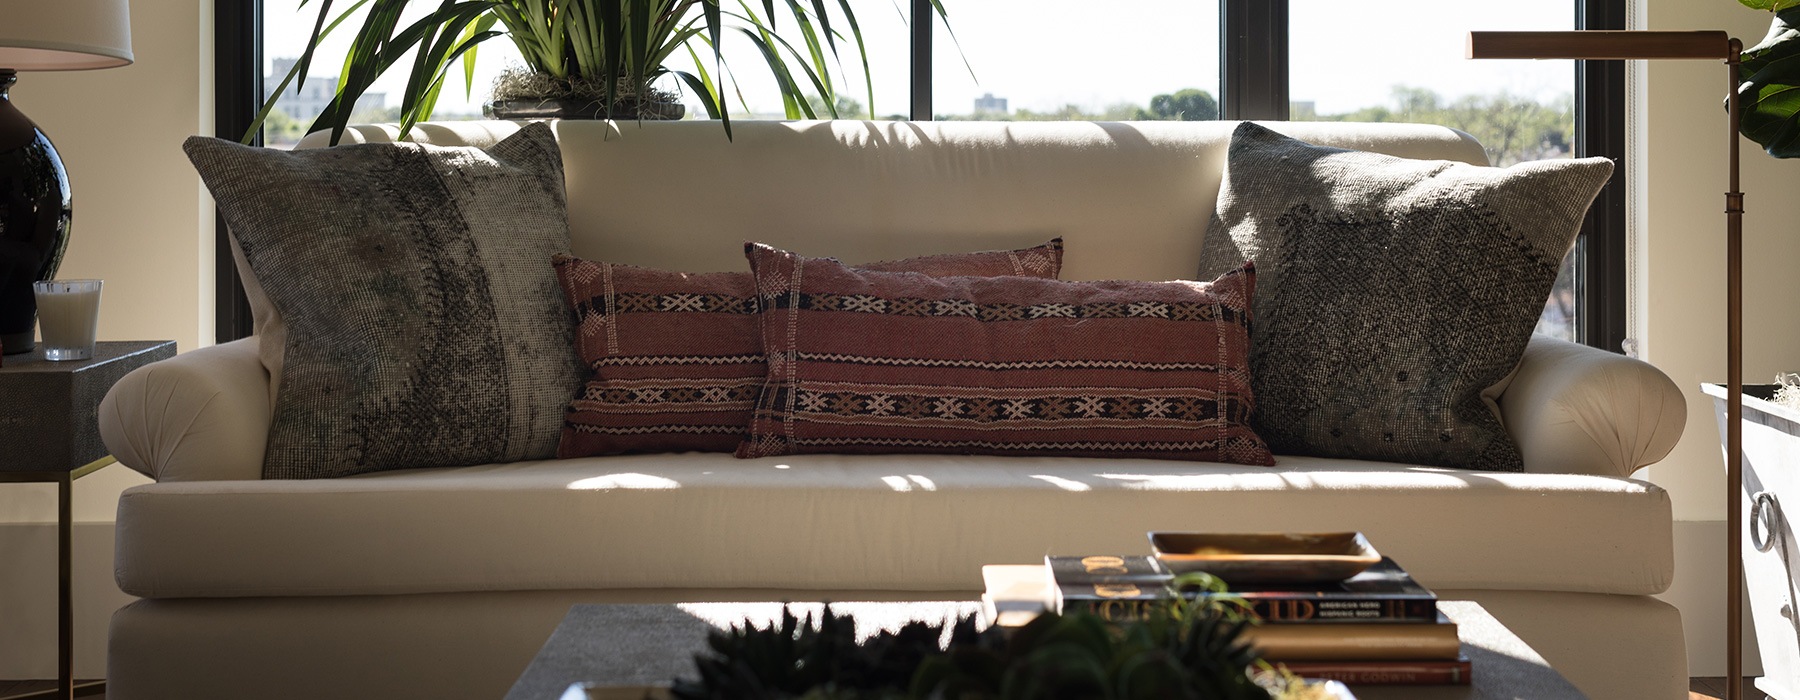 close-up of a couch and accent pillows